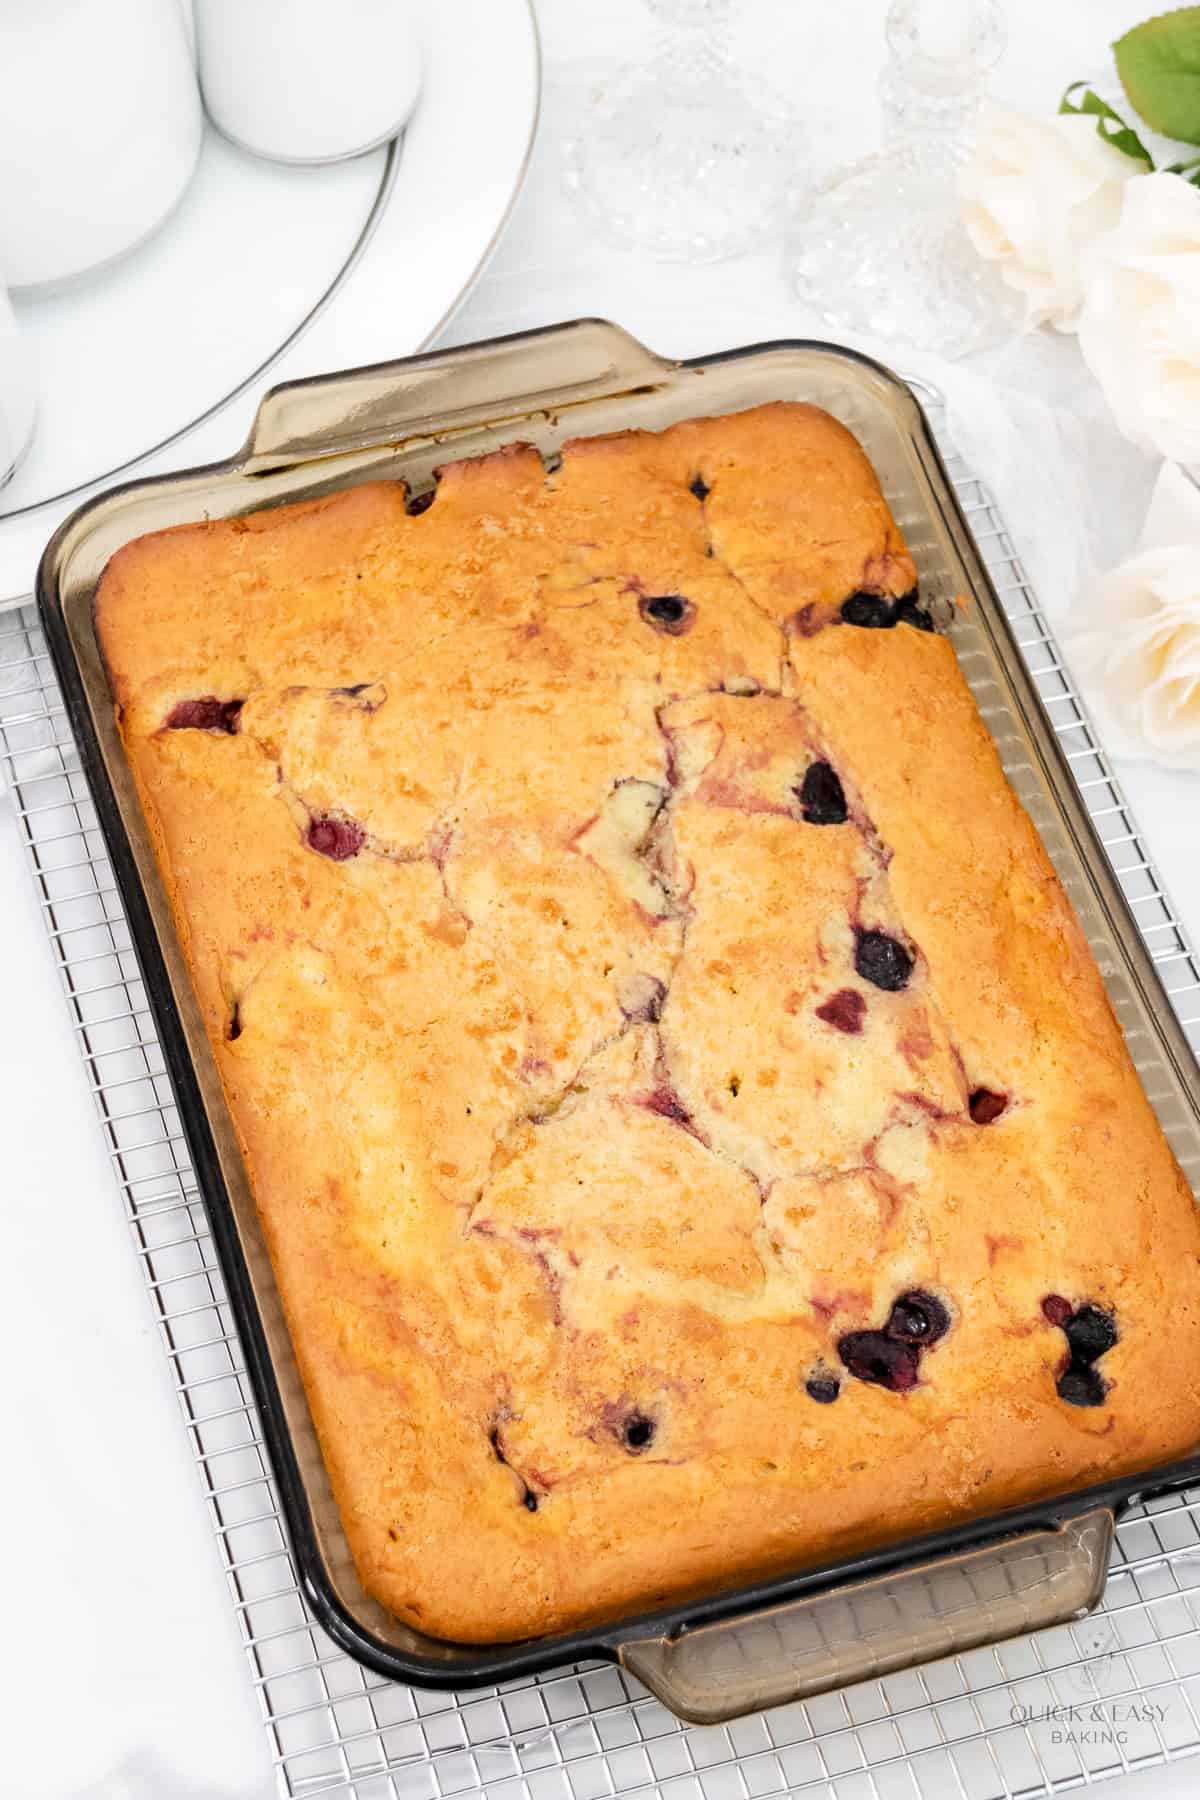 Baked cake with berries in a baking pan.